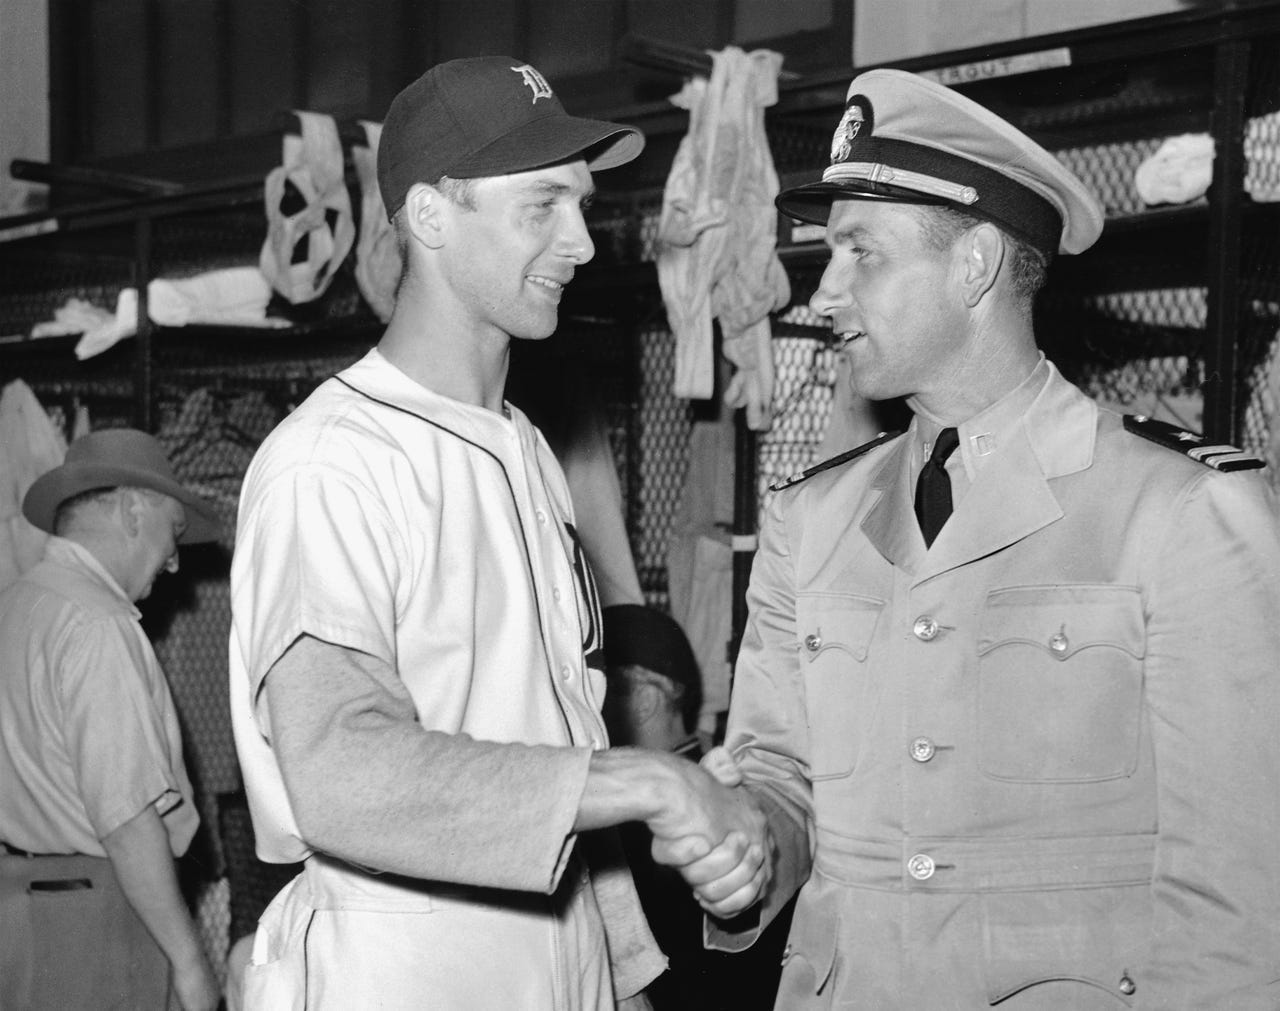 Tigers rookie Hal Newhouser and retired great Charlie Gehringer meet in the locker room at Briggs Stadium on Aug. 27, 1941. Newhouser had intended to join the service to fight for his country during World War II and was to take his oath on the Briggs Stadium mound before a game. However, a heart murmur was detected during his physical, so he remained with the Tigers.